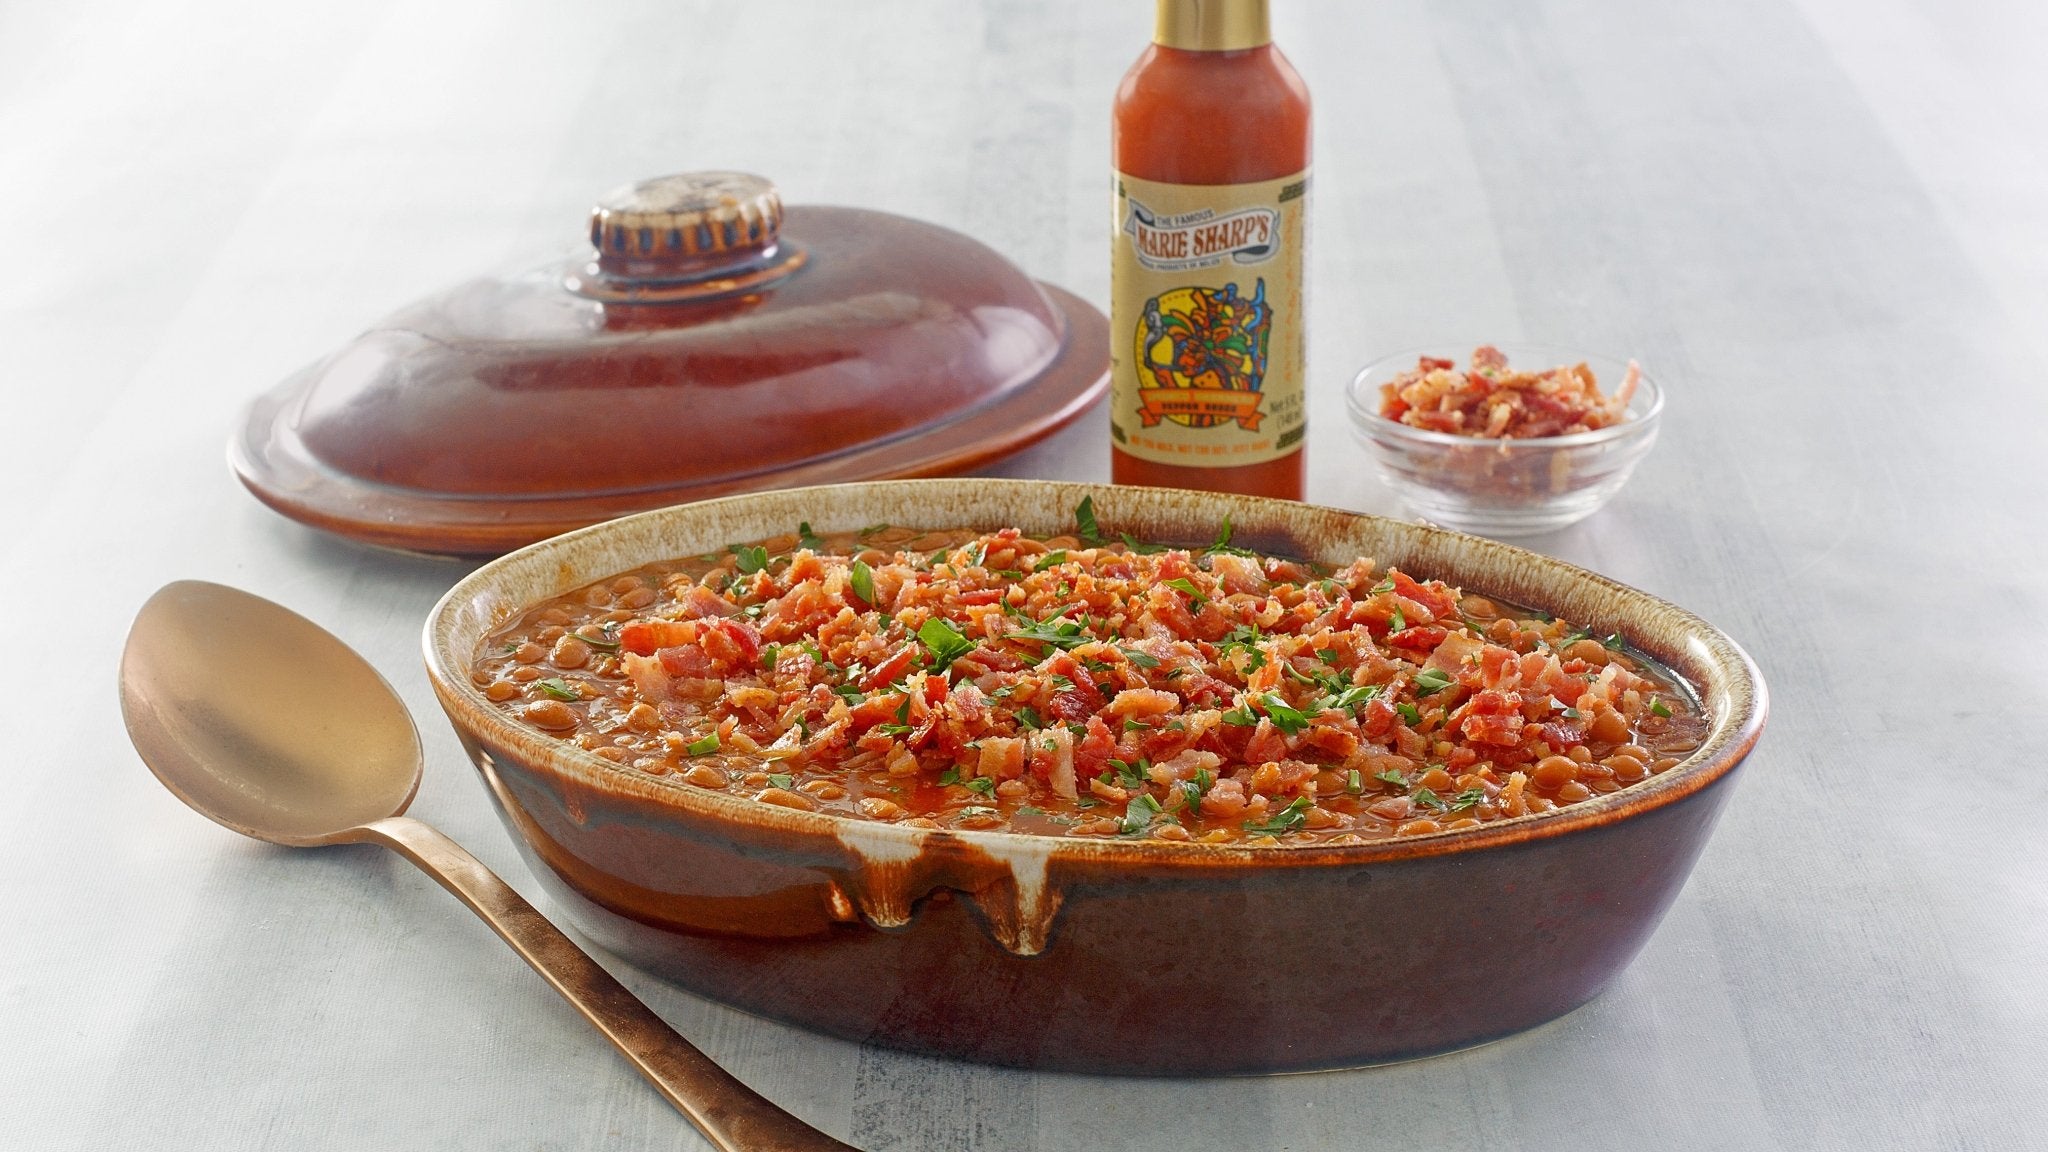 Spicy Baked Beans Recipe with Bacon and Marie Sharp’s Smoked Habanero Pepper Sauce - Marie Sharp's Company Store